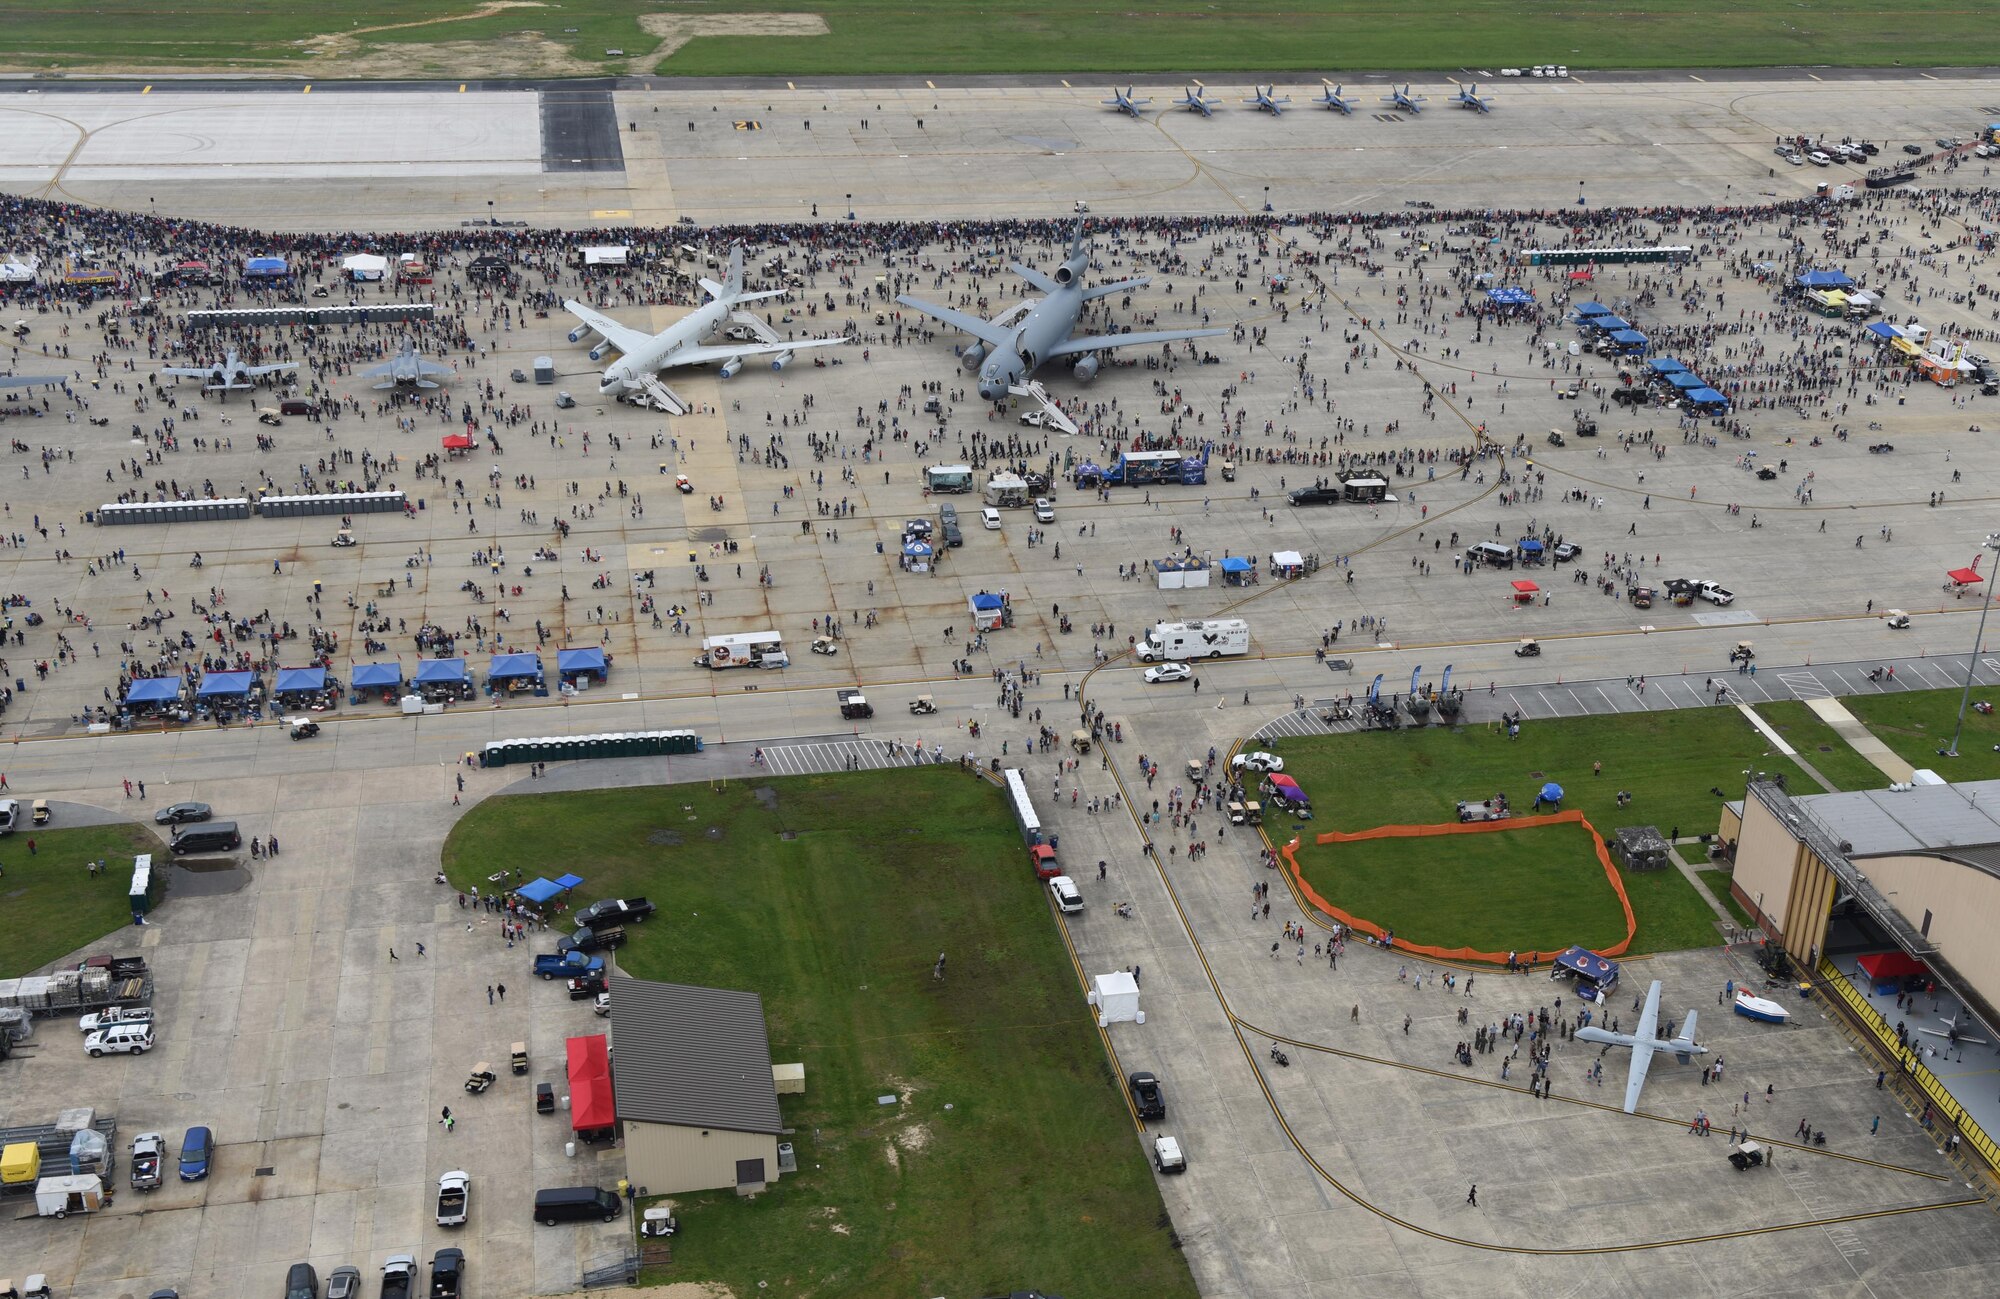 An aerial view of the flight line during the Joint Base Andrews 2019 Air and Space Expo at Joint Base Andrews, Maryland, May 10, 2019. Displayed among aircraft like the T-38 Talon and C-5 Galaxy, the MQ-9 Reaper was the only Remotely Piloted Aircraft in attendance at this year’s airshow. (U.S. Air Force photo by Airman 1st Class Haley Stevens)